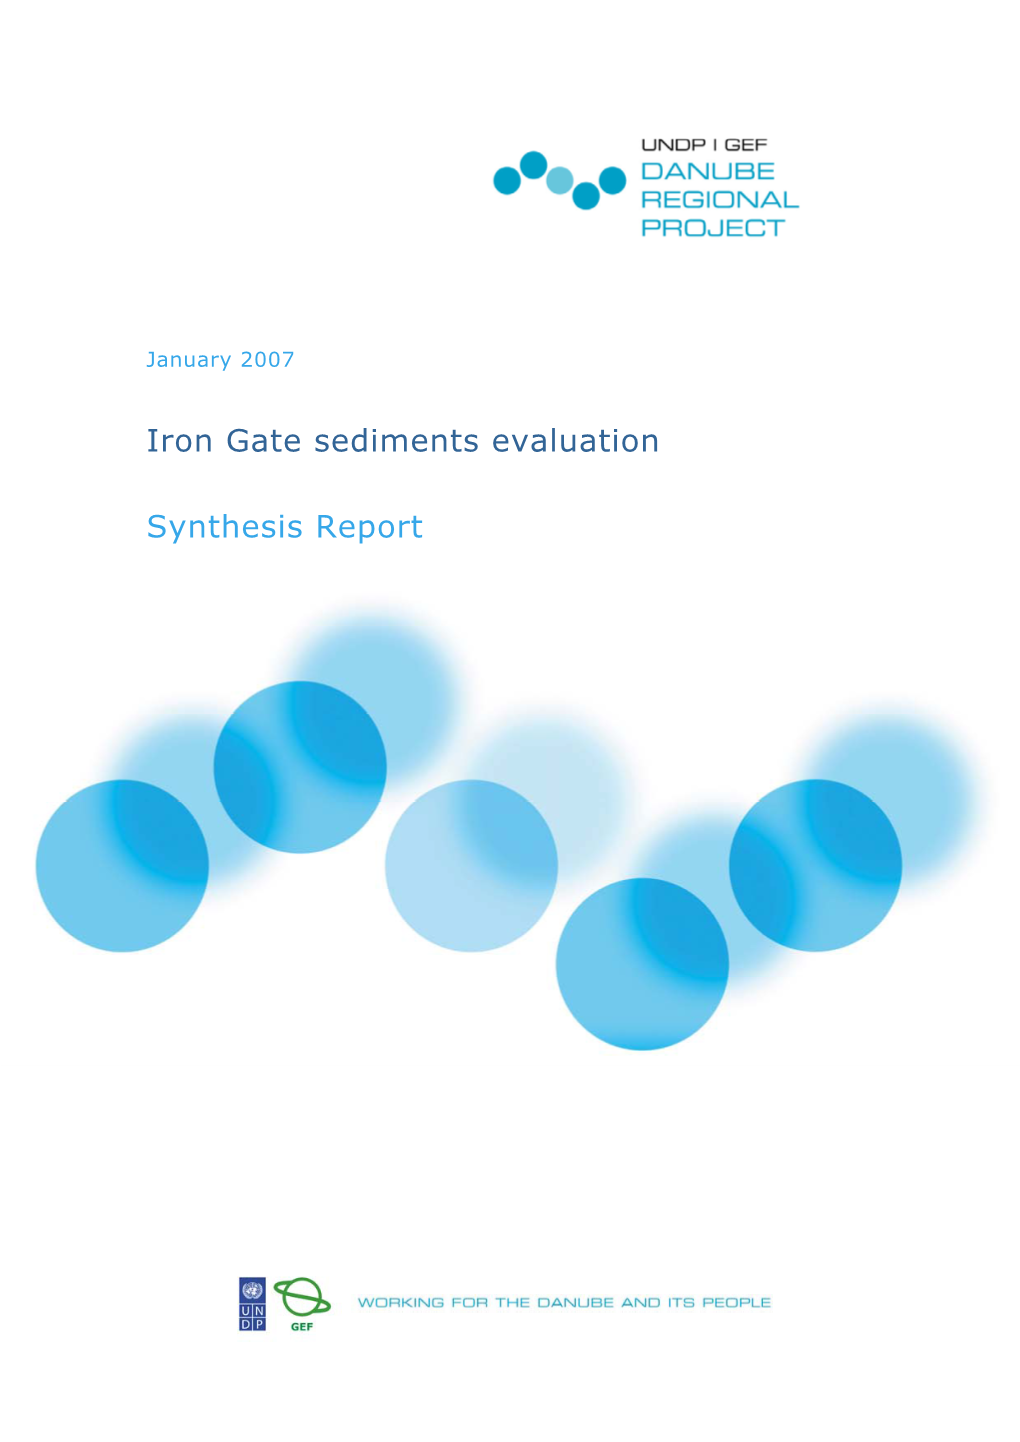 Iron Gate Sediments Evaluation Synthesis Report